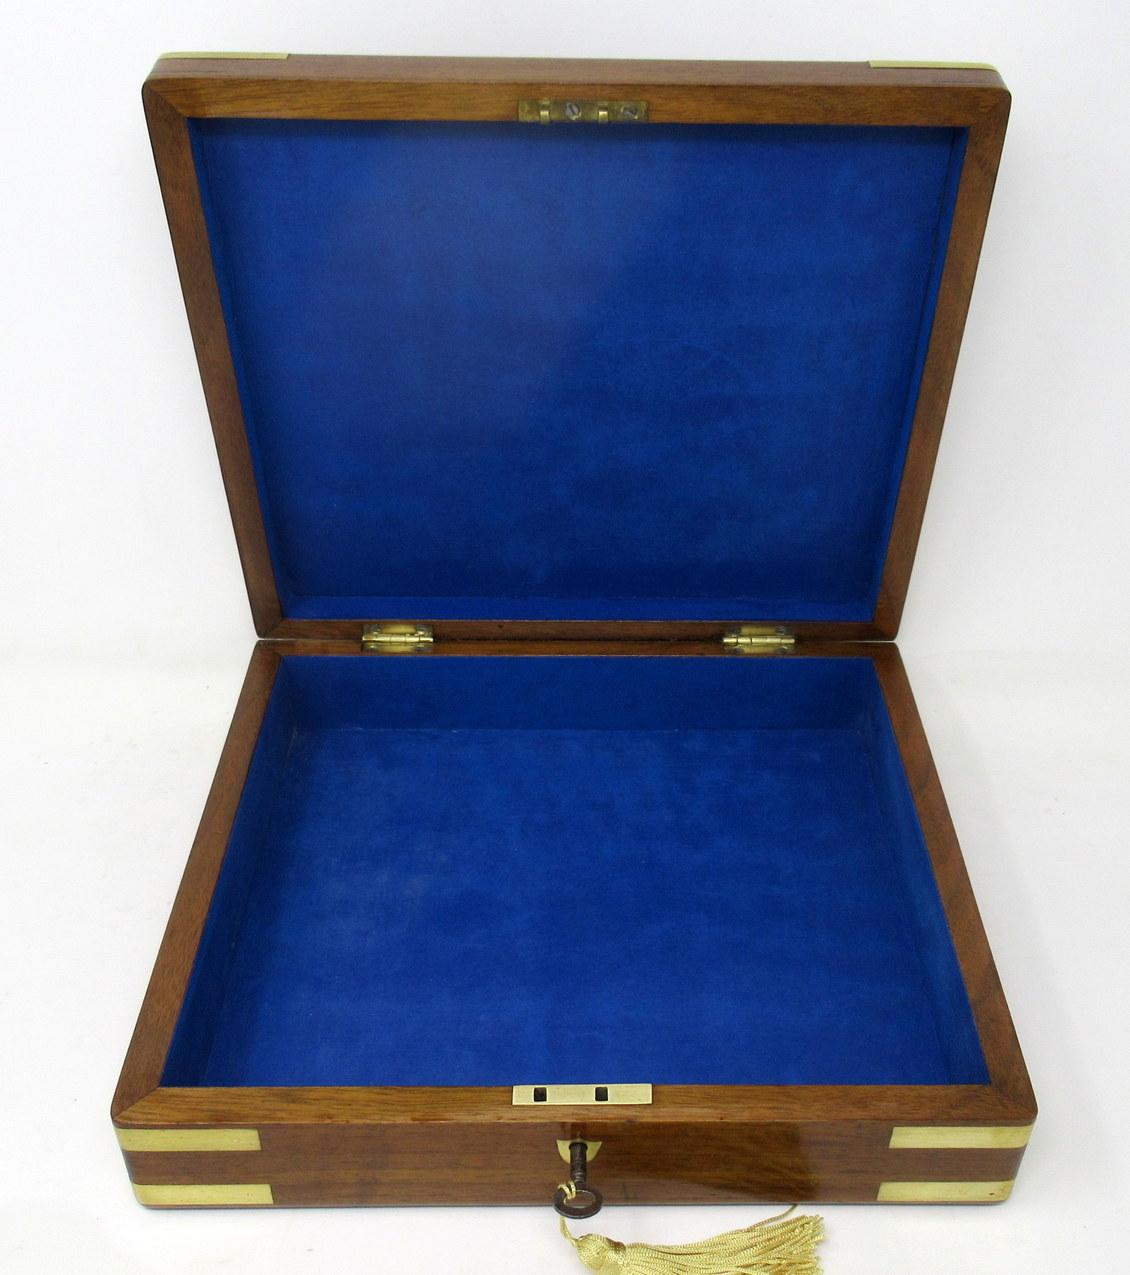 19th Century Antique Vintage Solid Mahogany Wooden Jewelry Box Casket Brass Bound 19th Cent